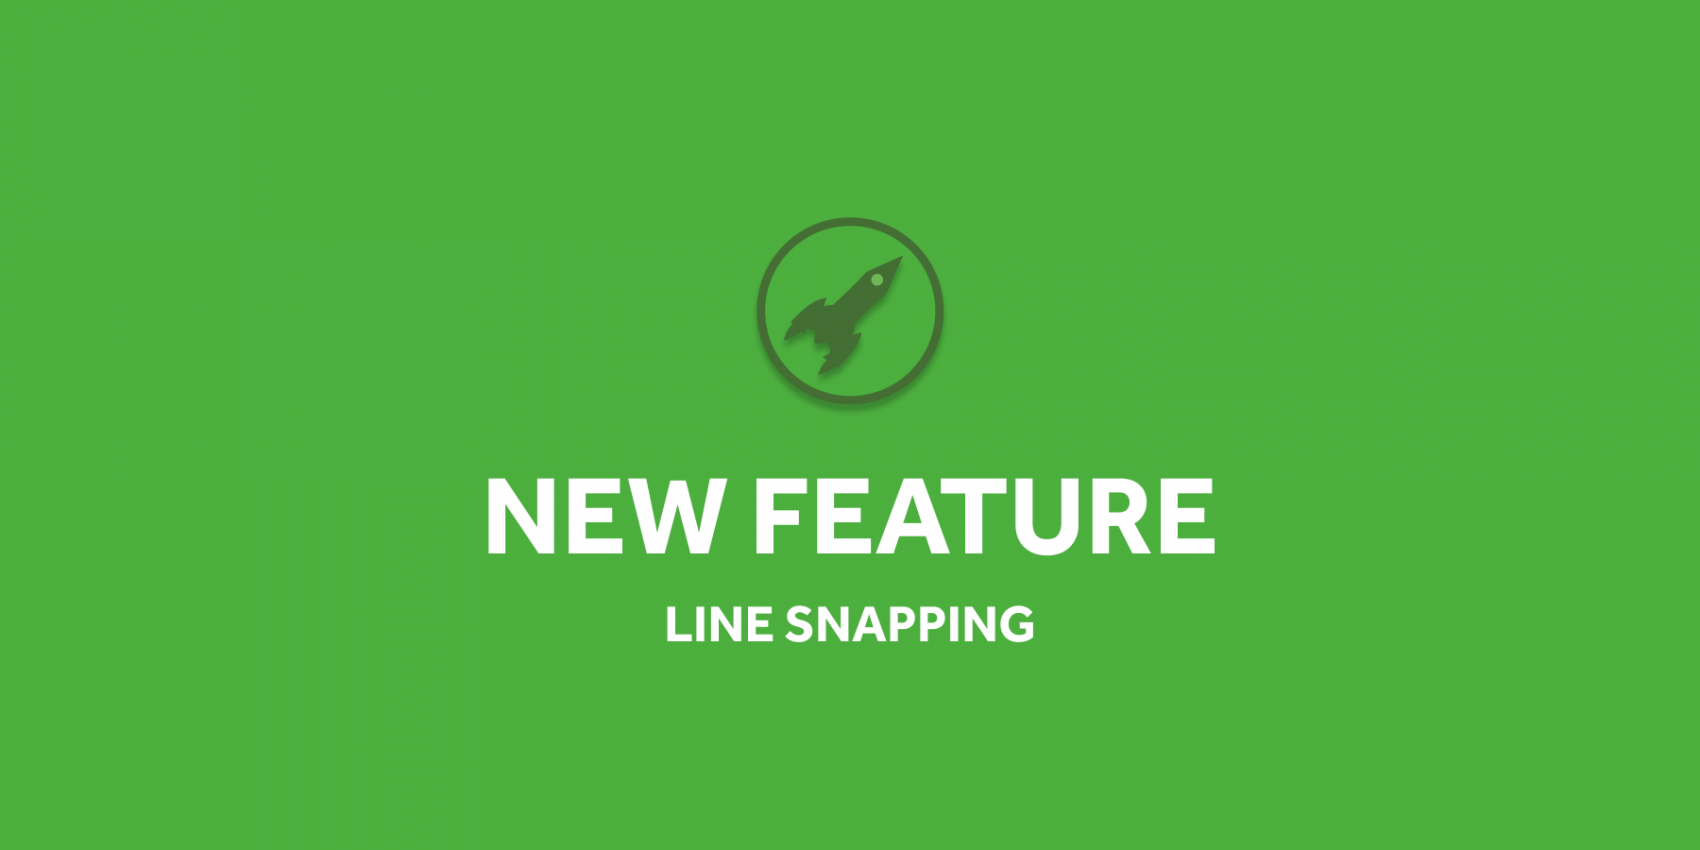 FEATURE: Line Snapping